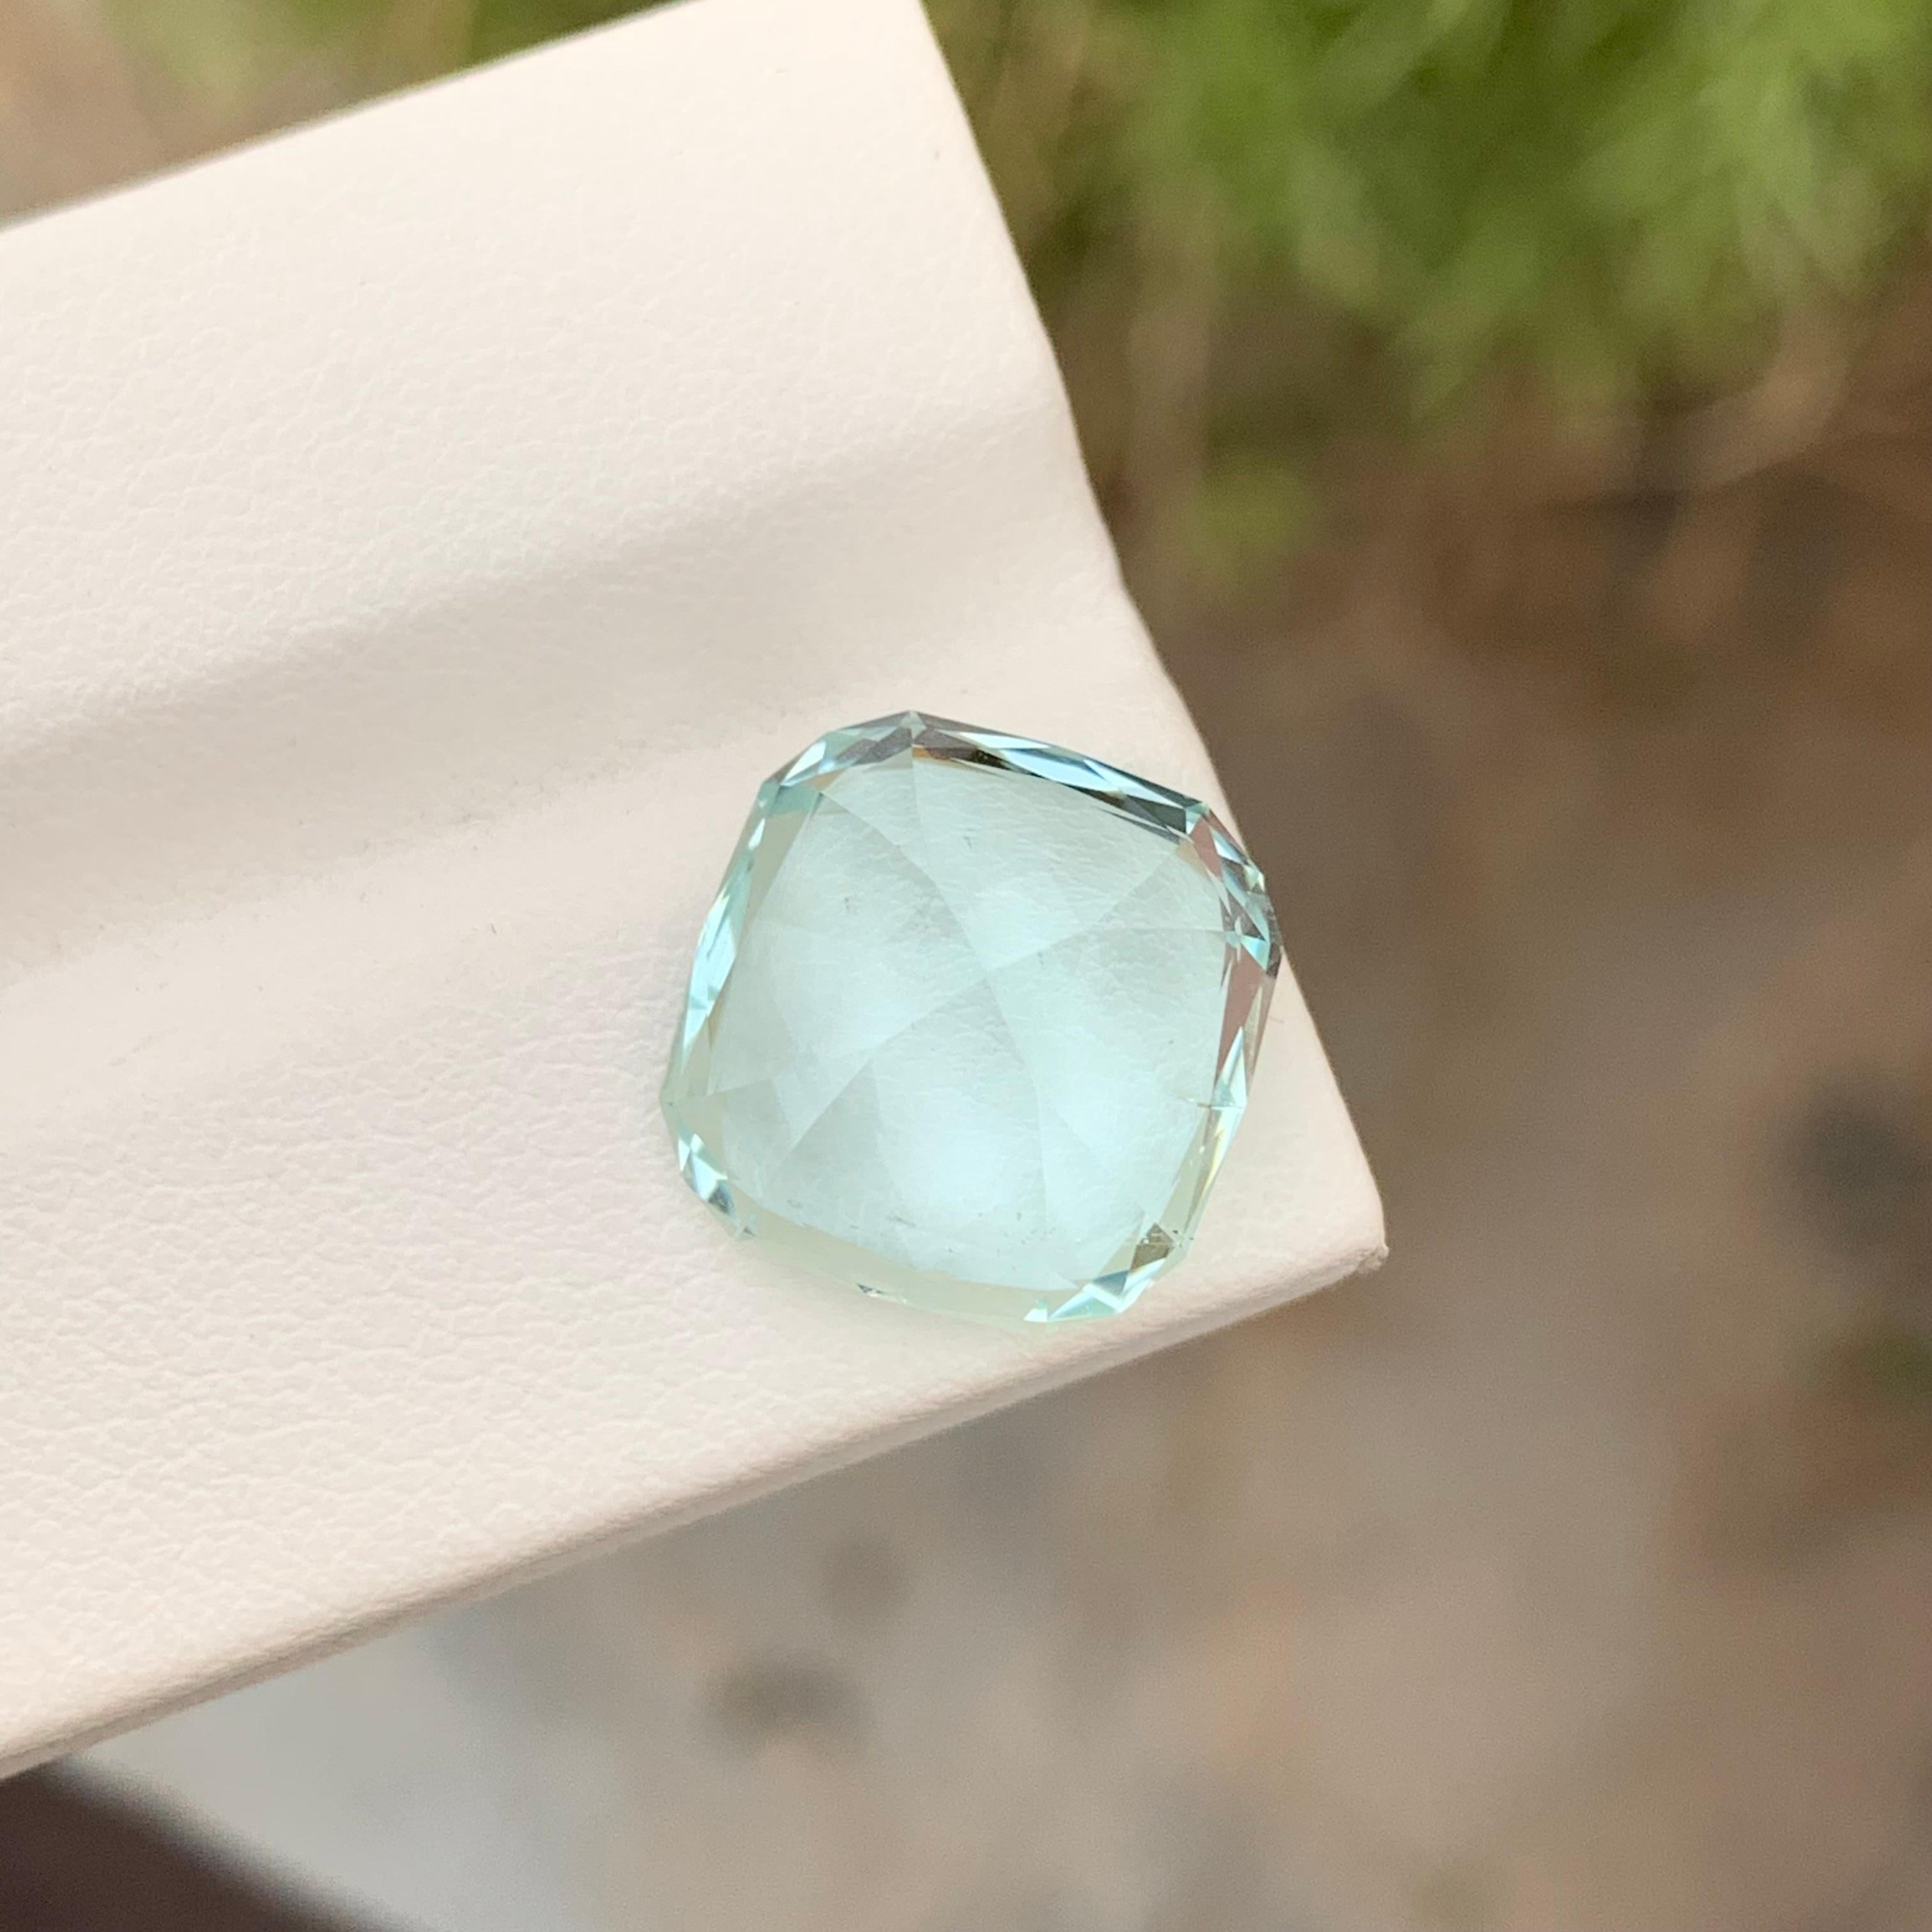 Loose Aquamarine 
Weight: 8.95 Carats 
Dimension: 13.2x12.9x8.9 Mm
Origin: Shigar Valley Pakistan 
Treatment: Non
Color; Light Seafoam 
Treatment: Non
Certificate; On Demand 
Aquamarine, a gemstone celebrated for its tranquil blue hues reminiscent